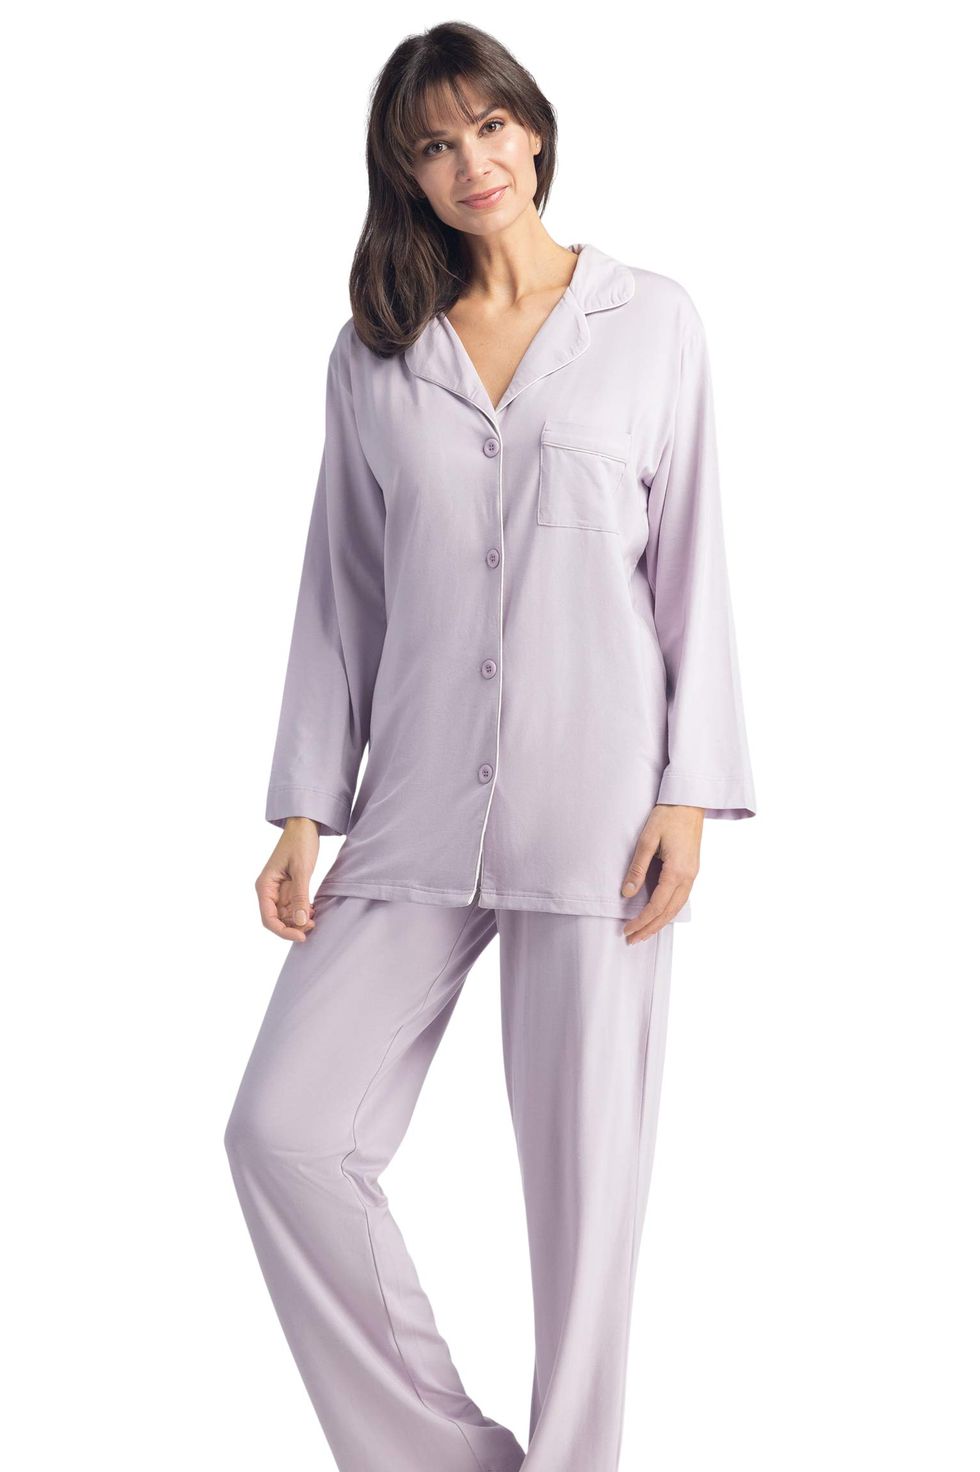 15 Sexy Pajamas for Women You Need to See